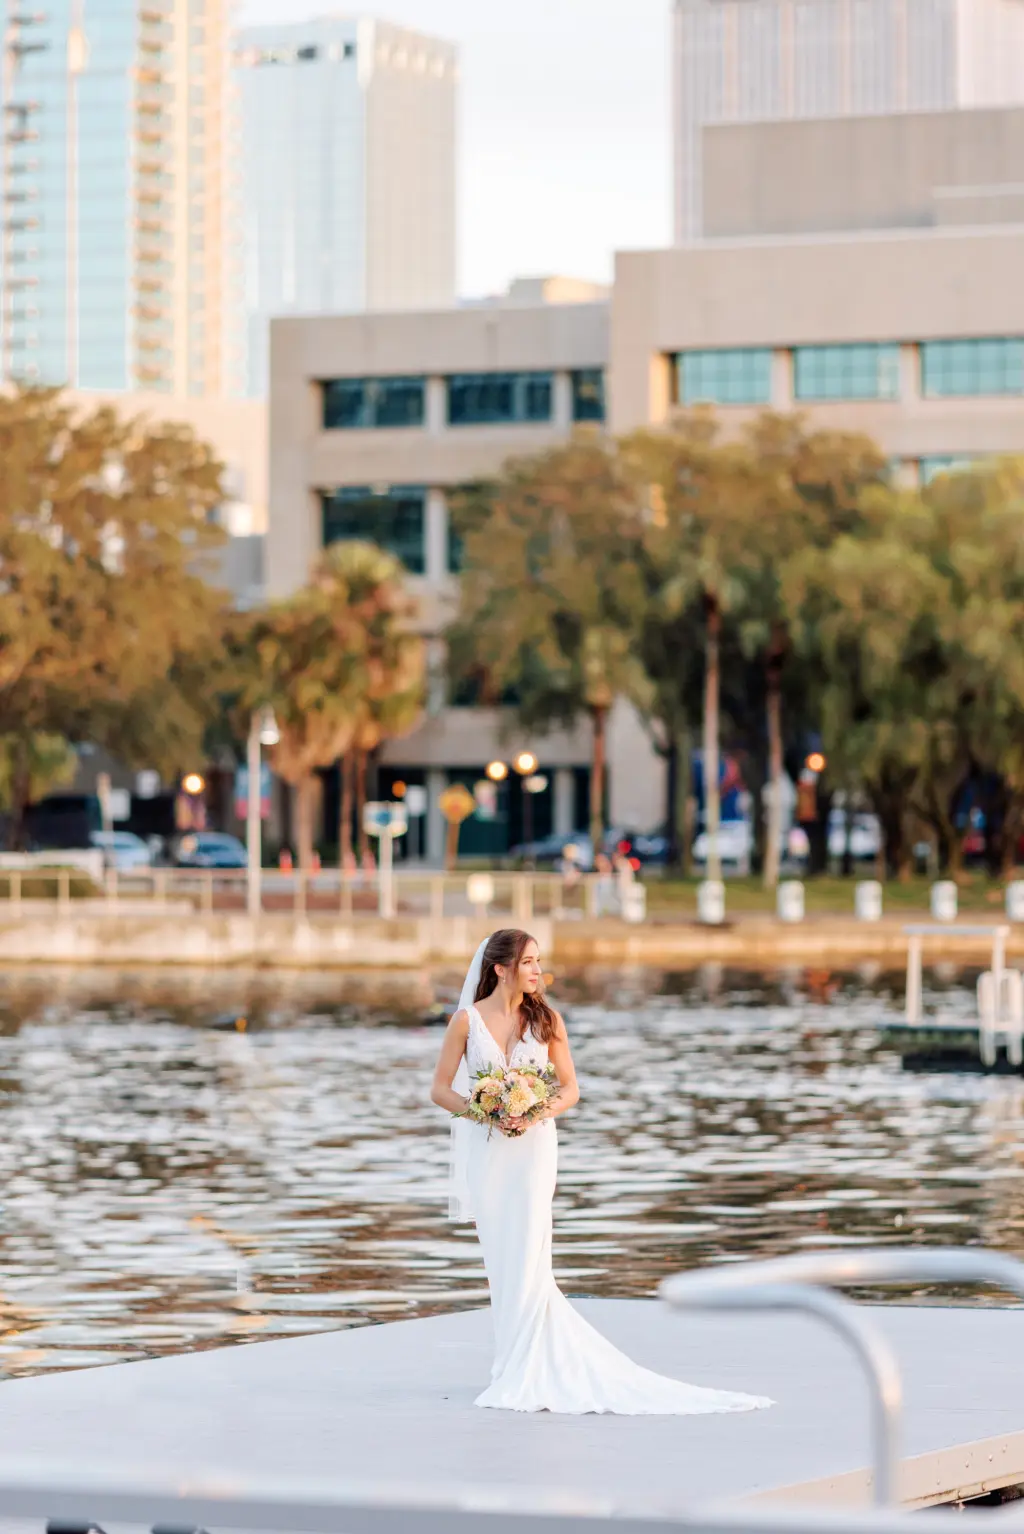 Elegant Hair and Makeup Ideas | Ivory Lace Fit and Flare Wedding Dress Inspiration | Tampa Riverwalk Dock Outdoor Bridal Portrait | Venue Tampa River Center